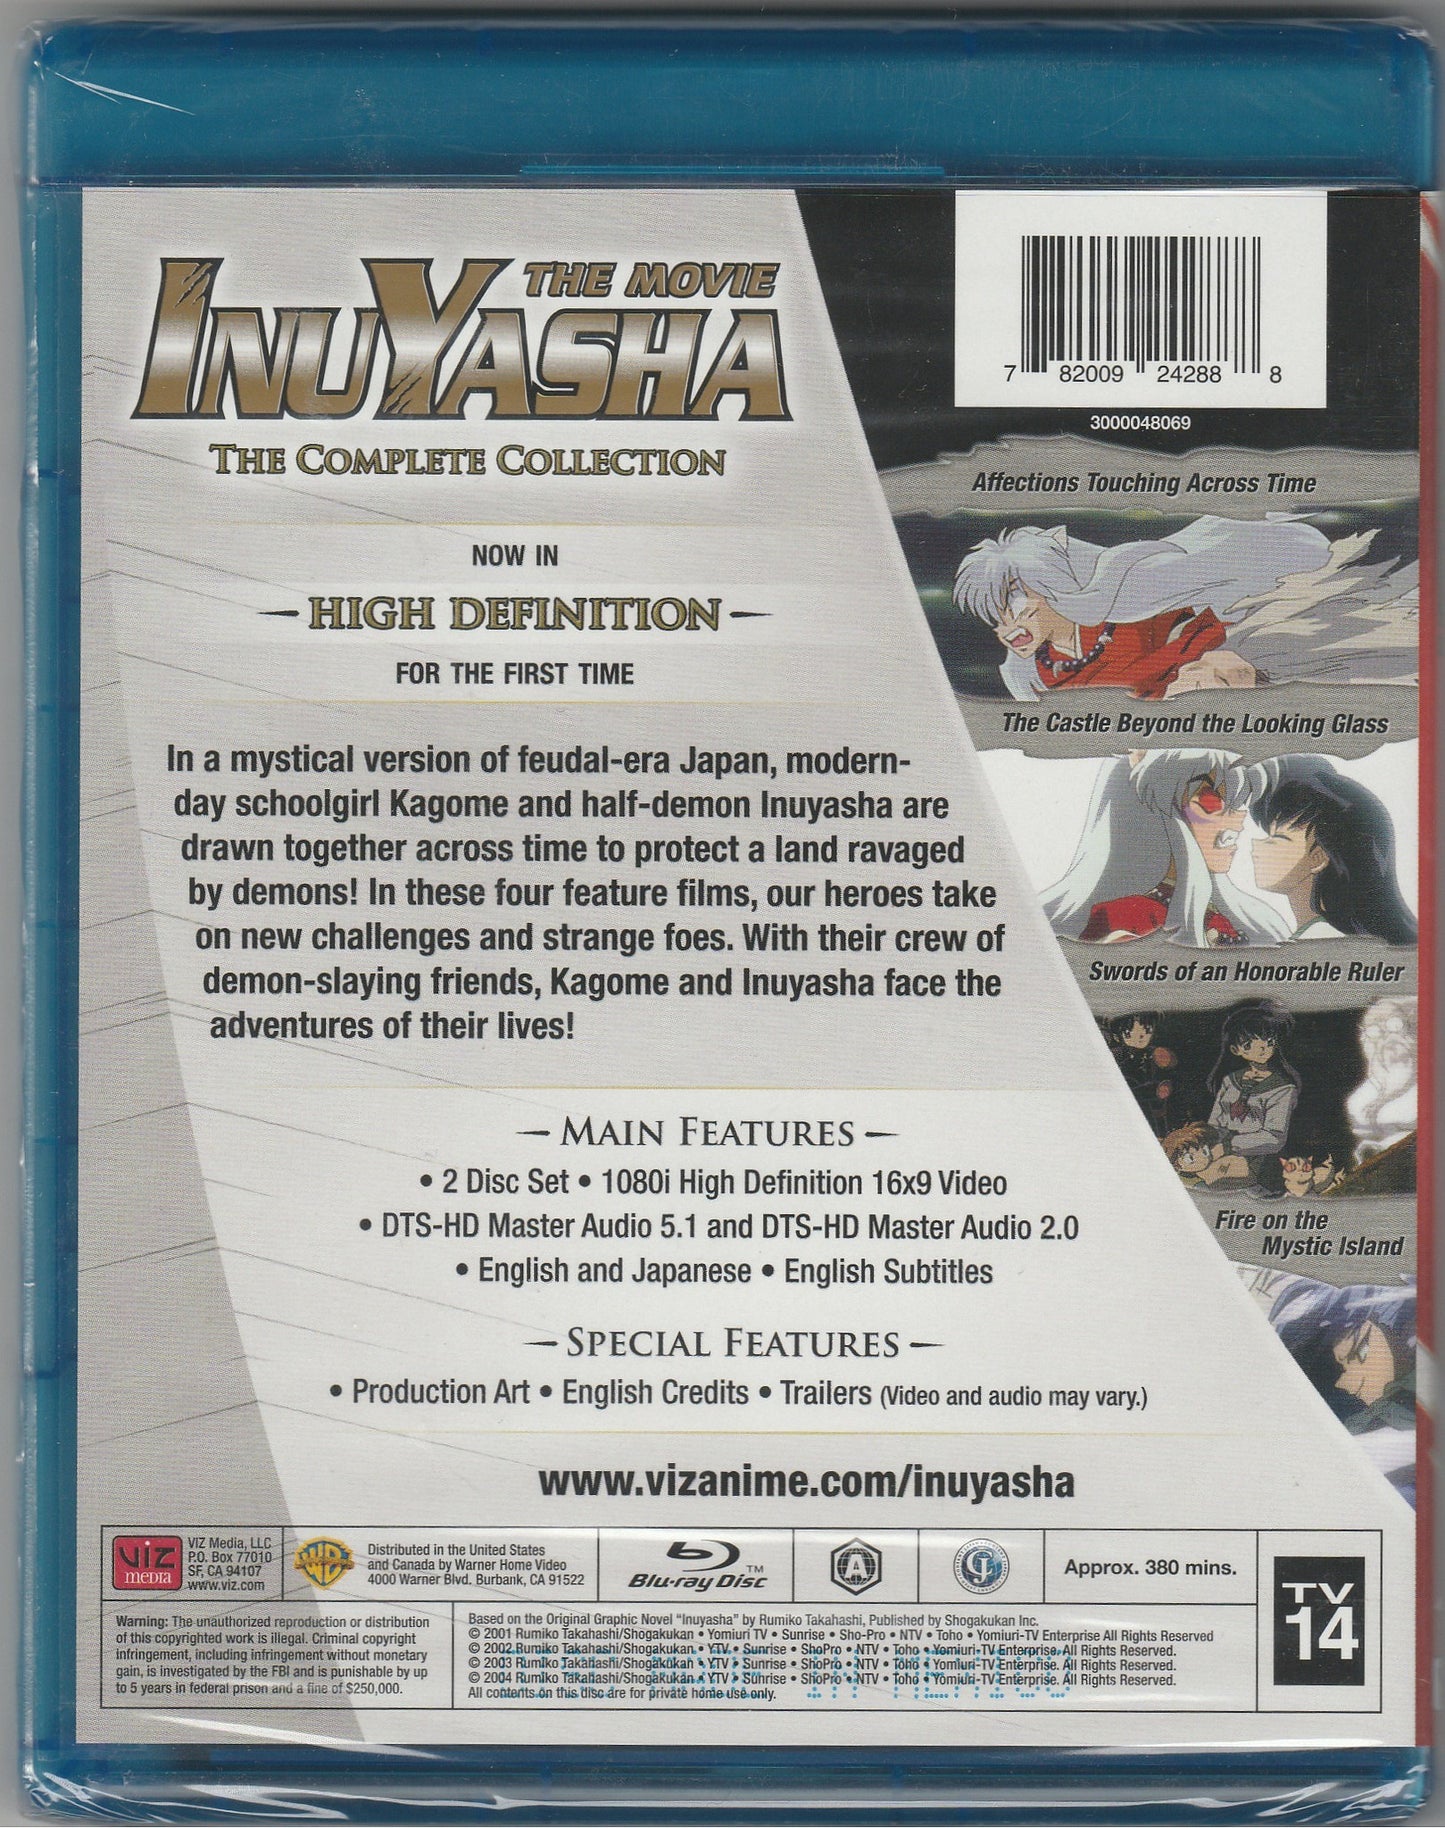 Inuyasha The Movie Complete Collection Blu-ray Disc